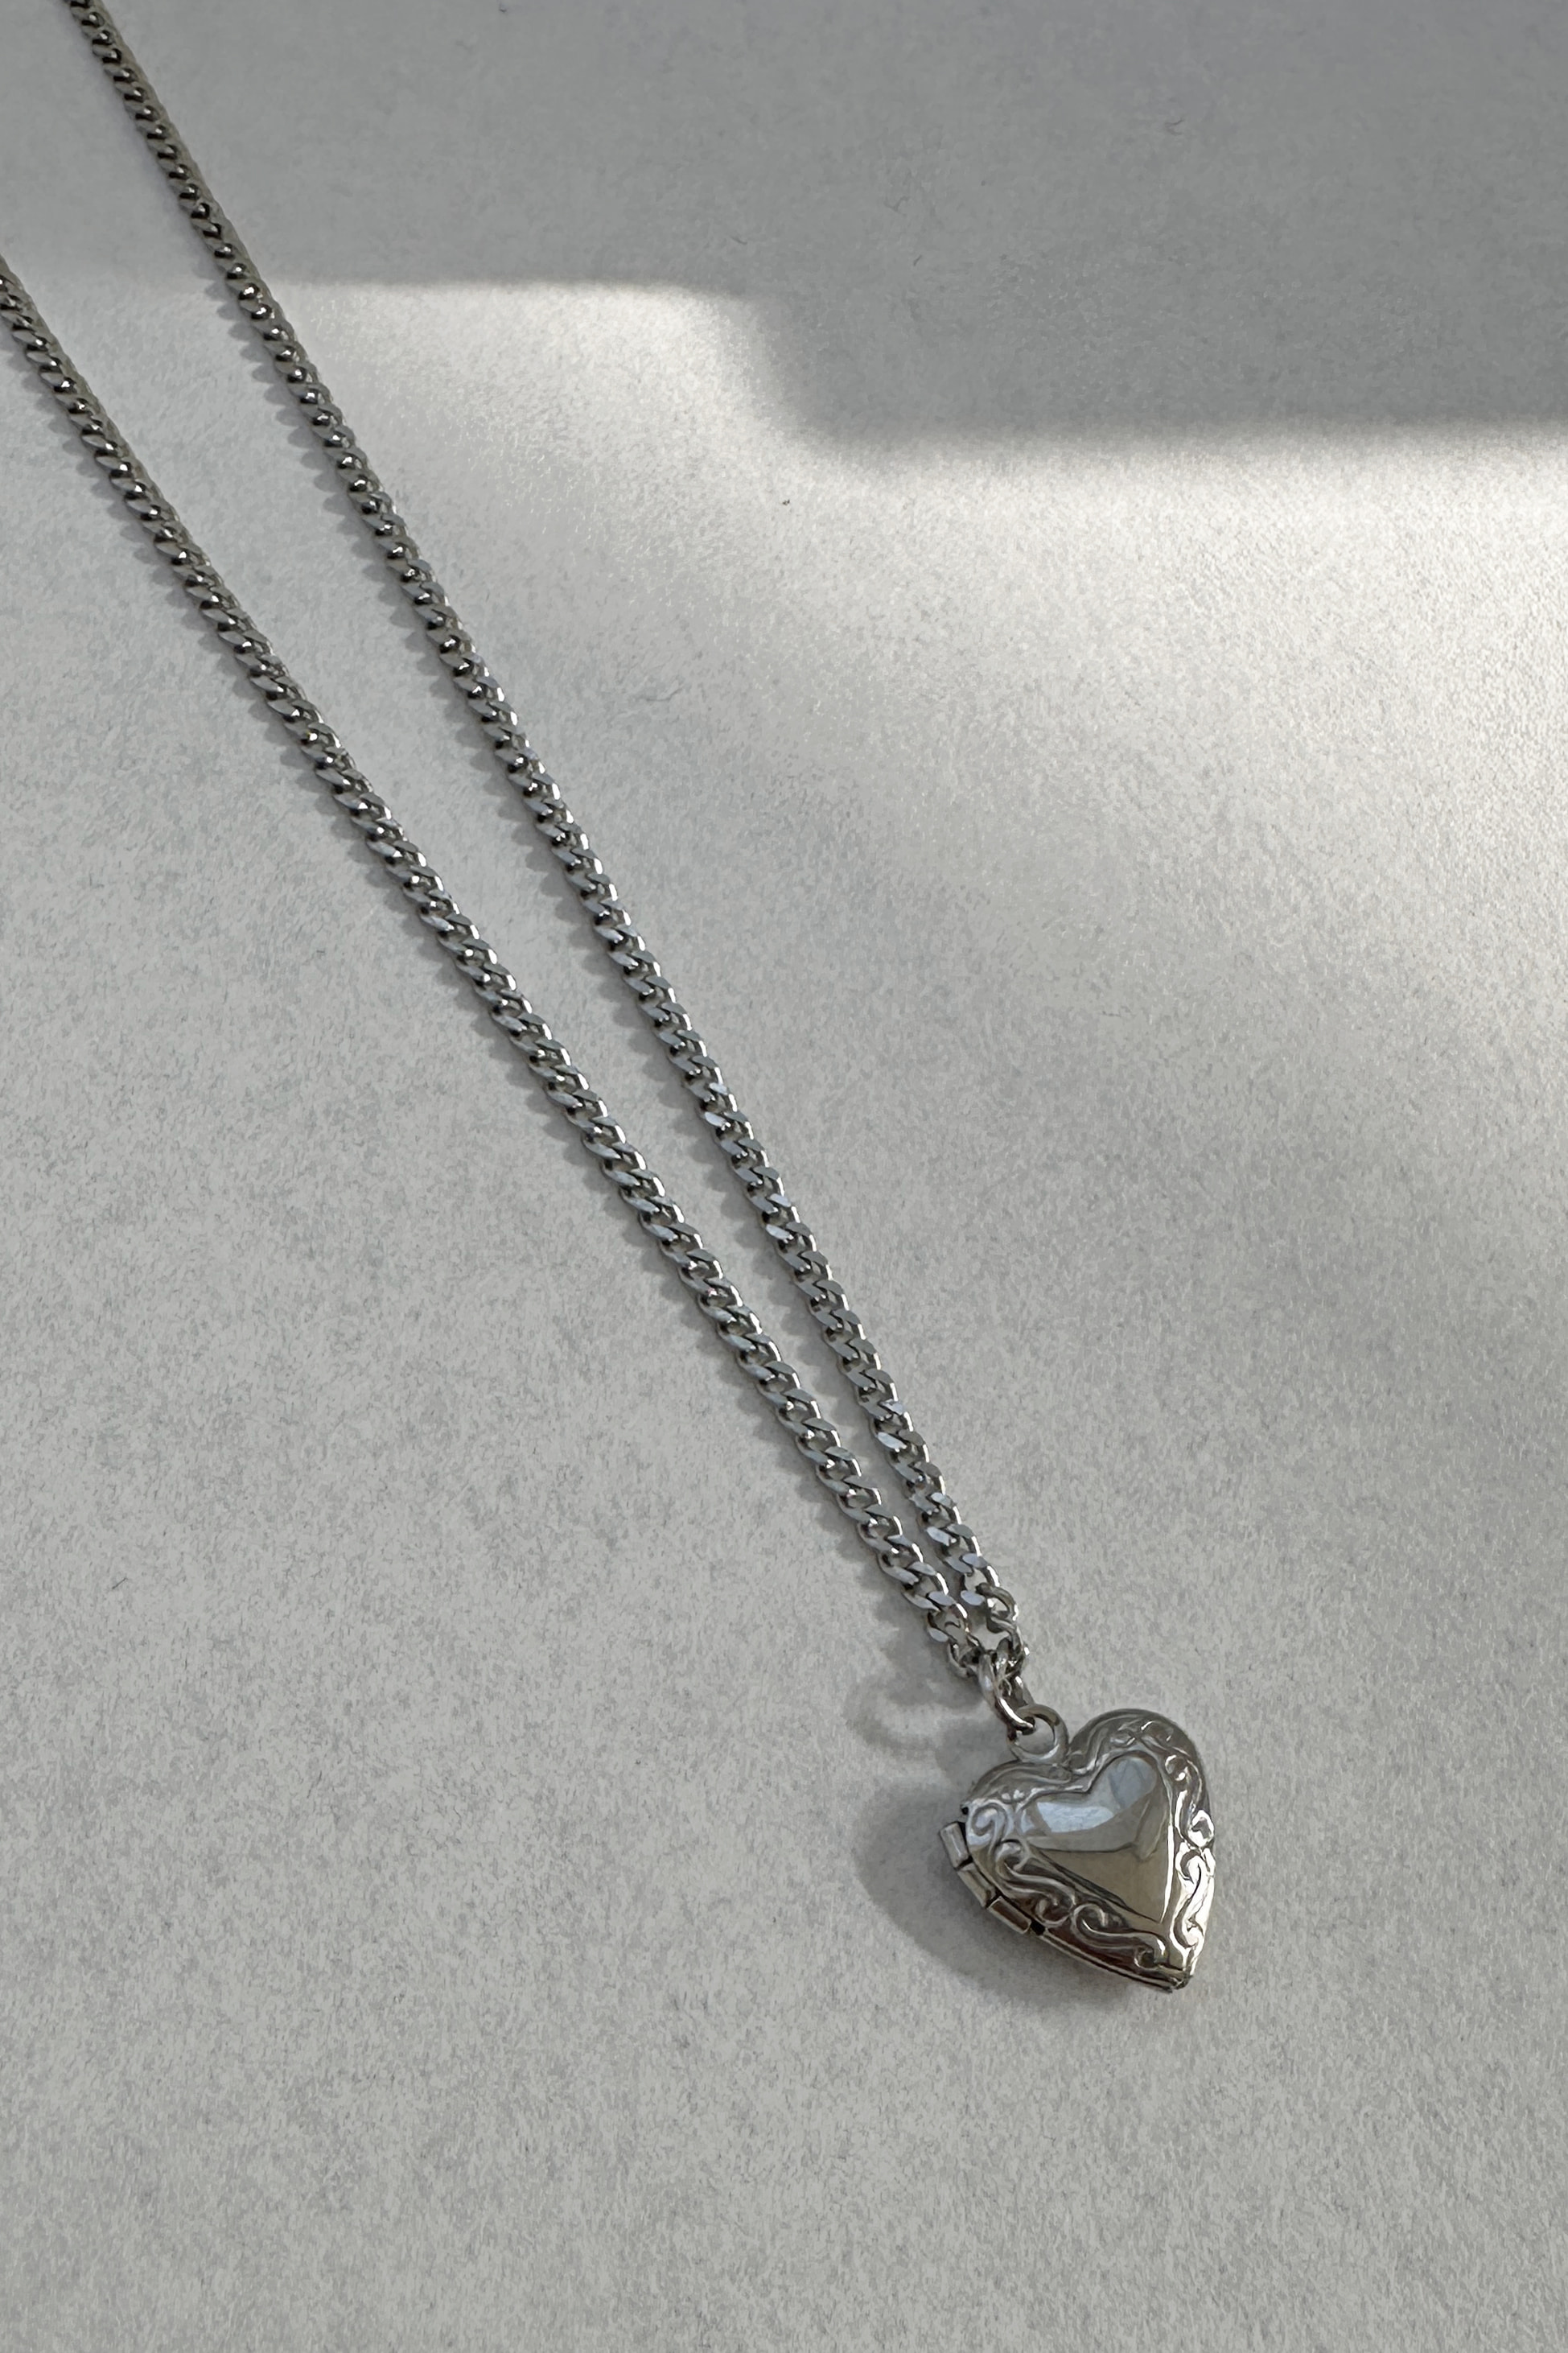 SURGICAL HEART NECKLACE